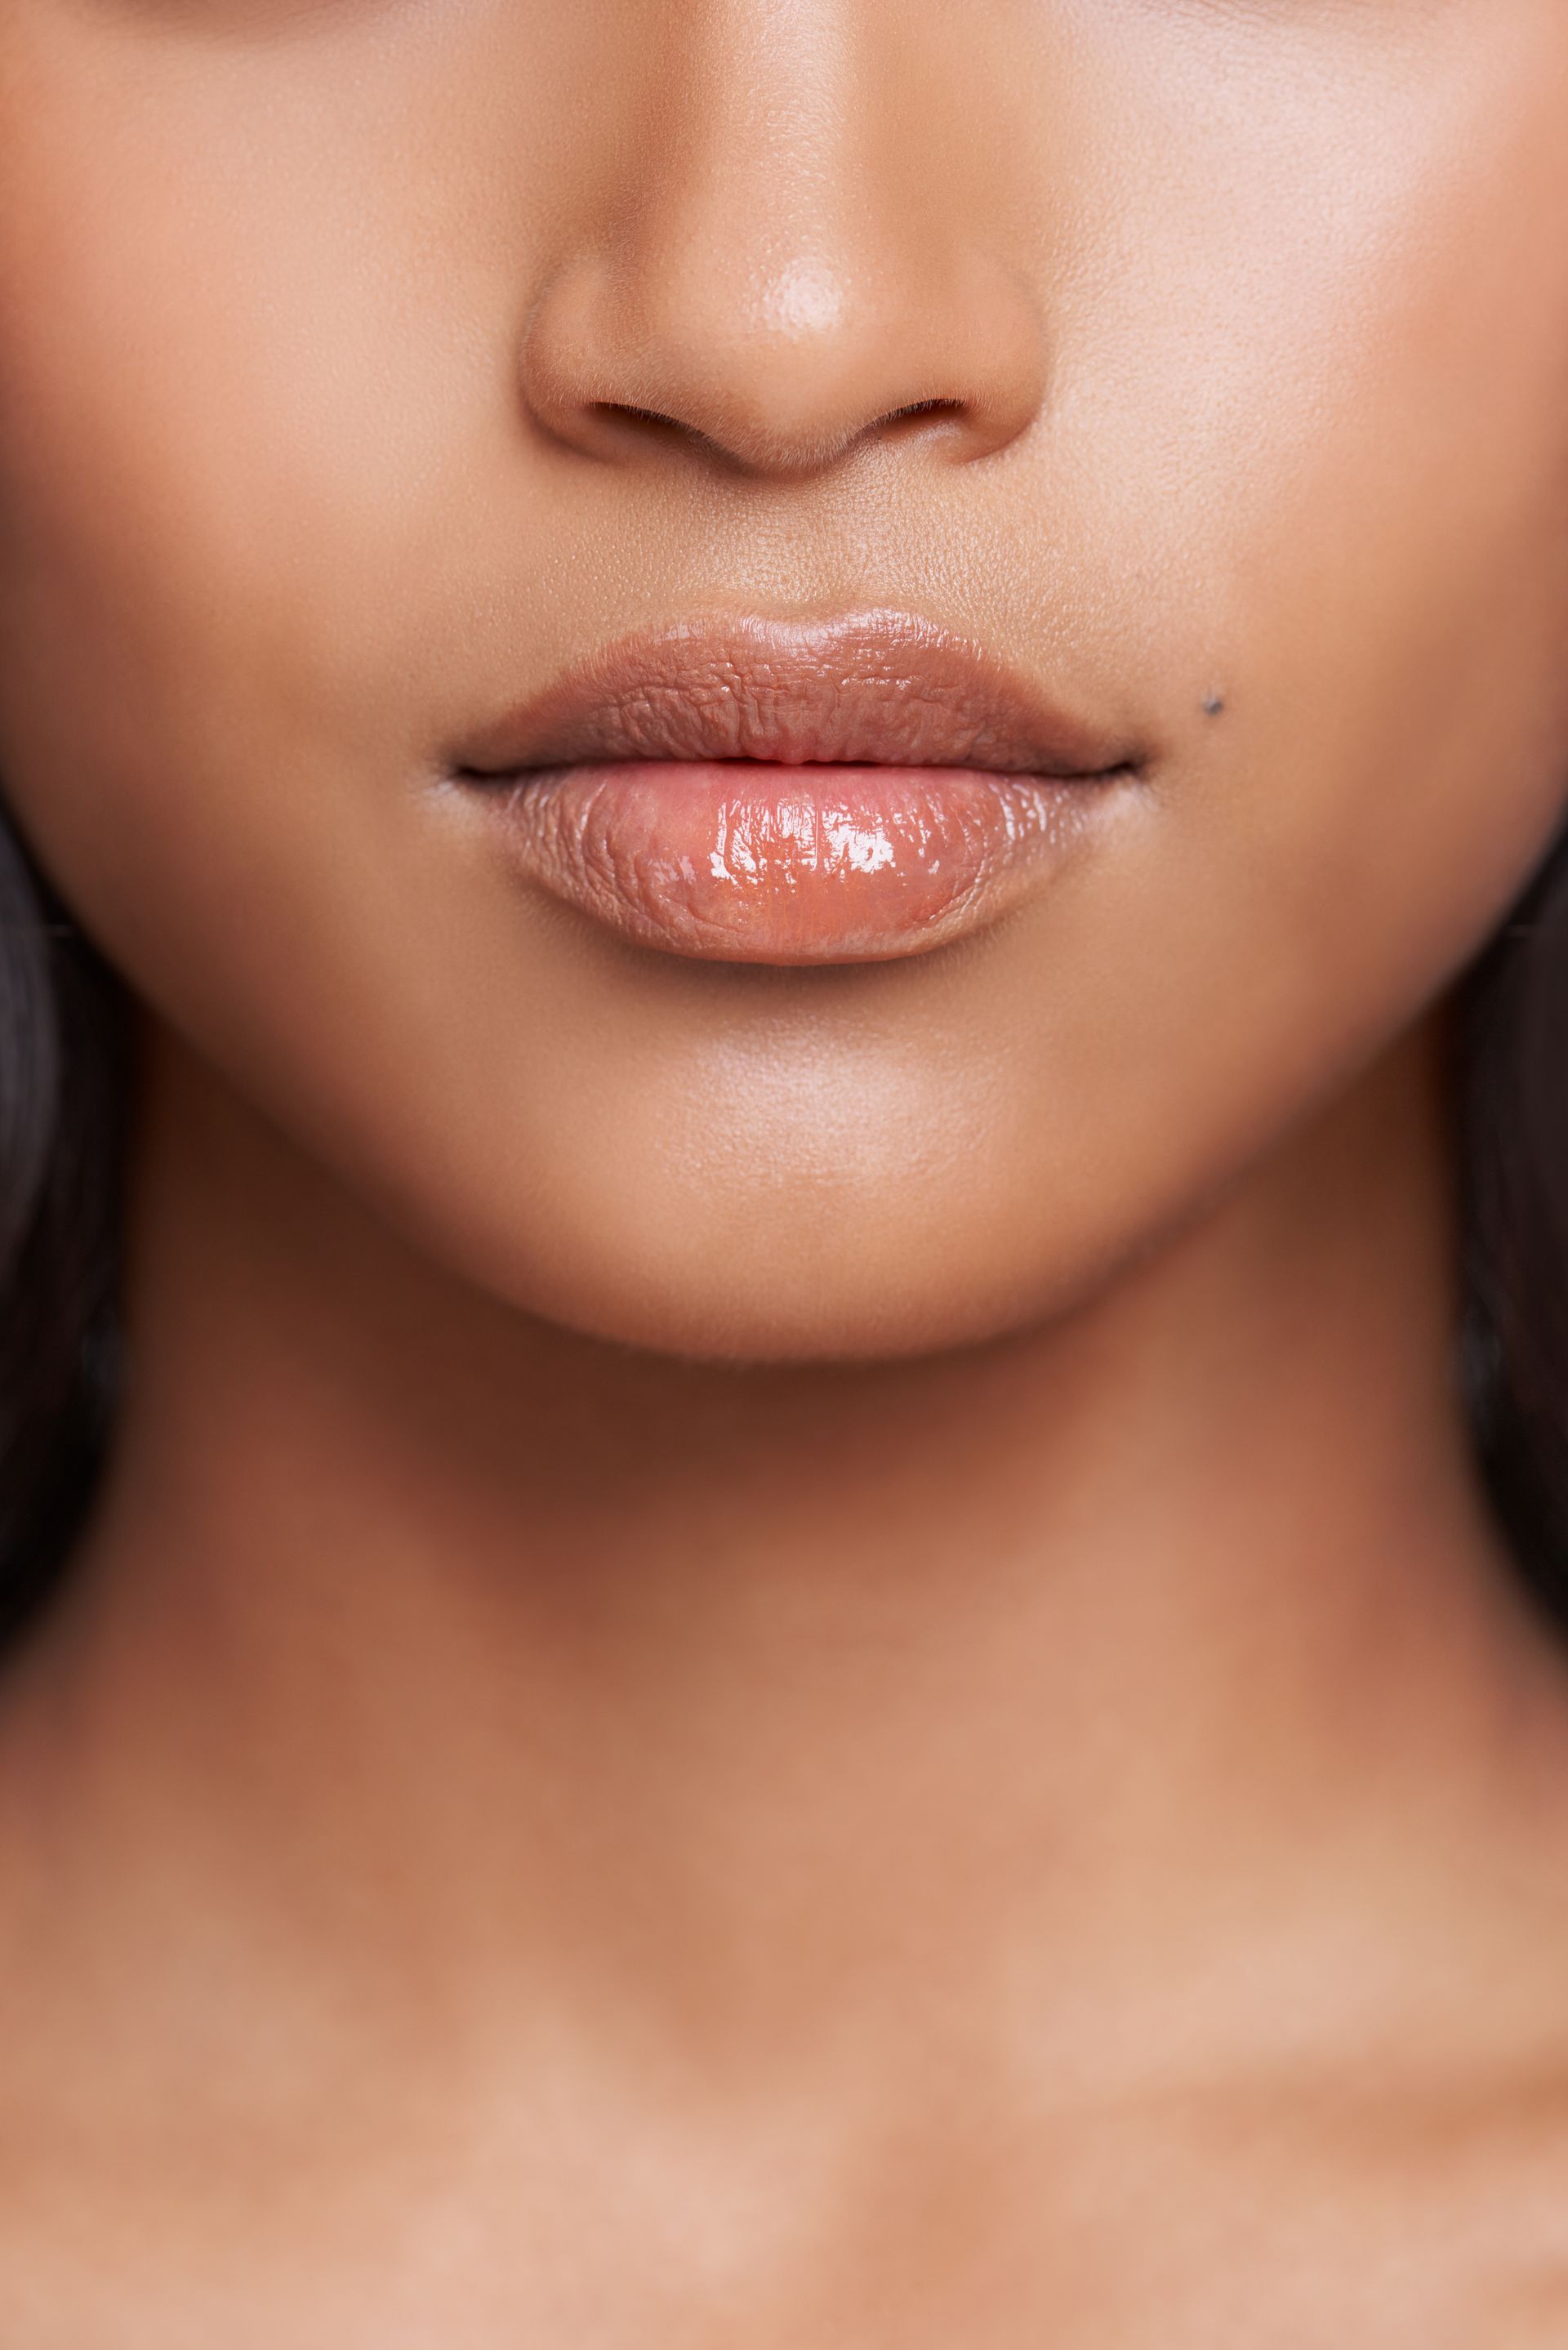 a close up of a woman 's lips and nose